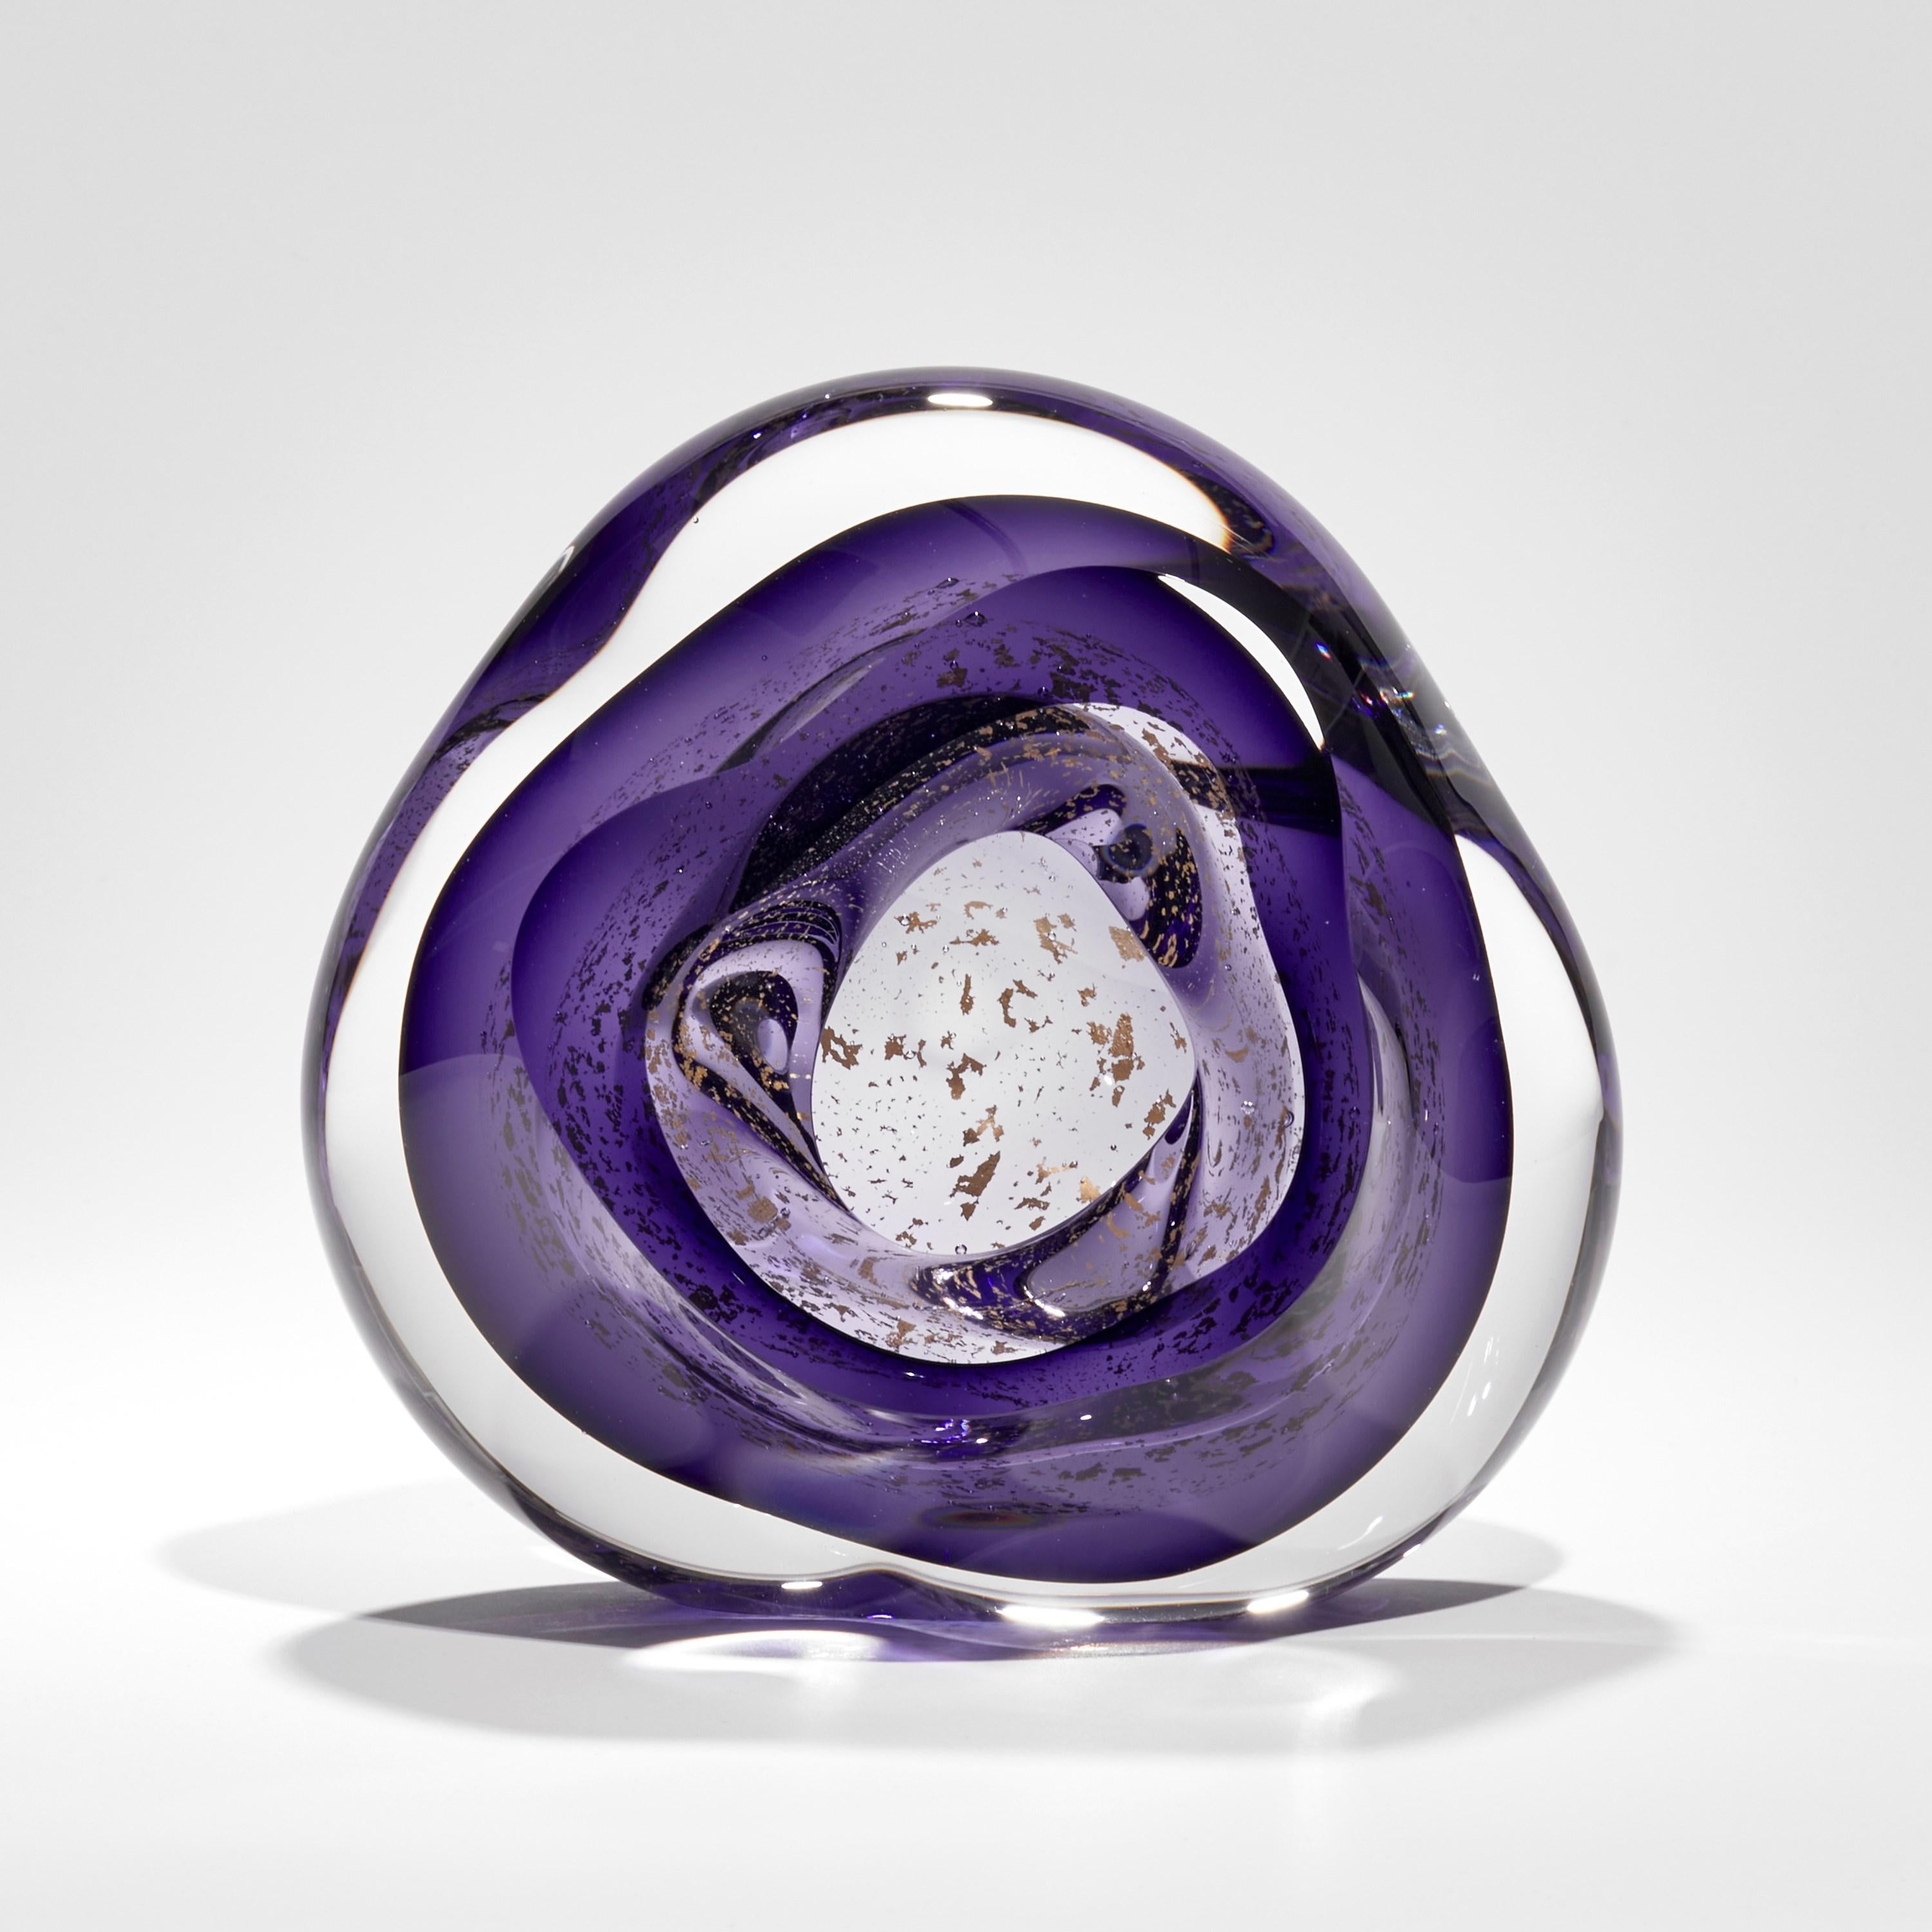 'Oro Vug in Purple II' is a unique handblown glass sculpture by the British artist, Samantha Donaldson. Created from layers of clear and rich purple coloured glass with 24 carat gold leaf, these elements merge creating the illusion of swirling gold